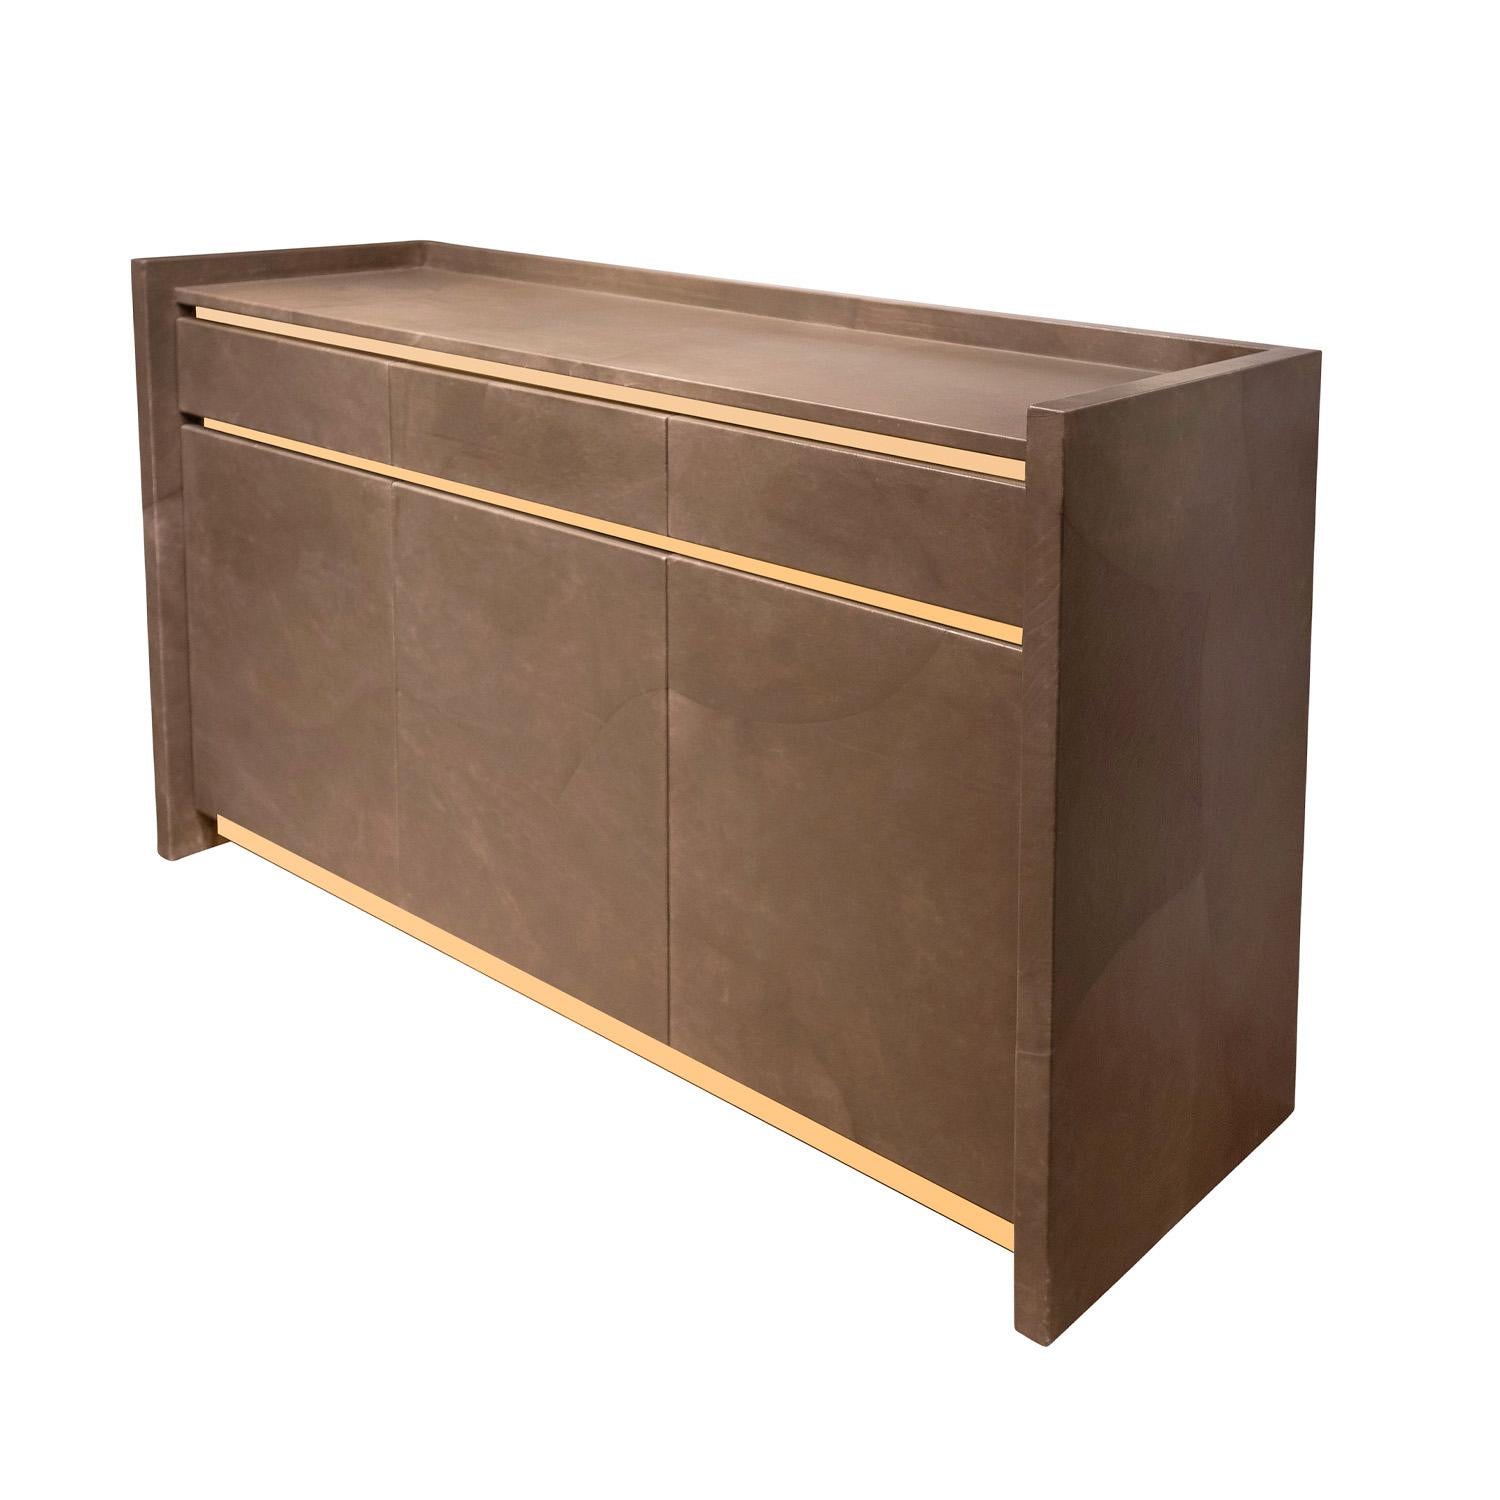 Modern Karl Springer Rare Credenza in Taupe Leather and Brass 1985 'Signed and Dated' For Sale